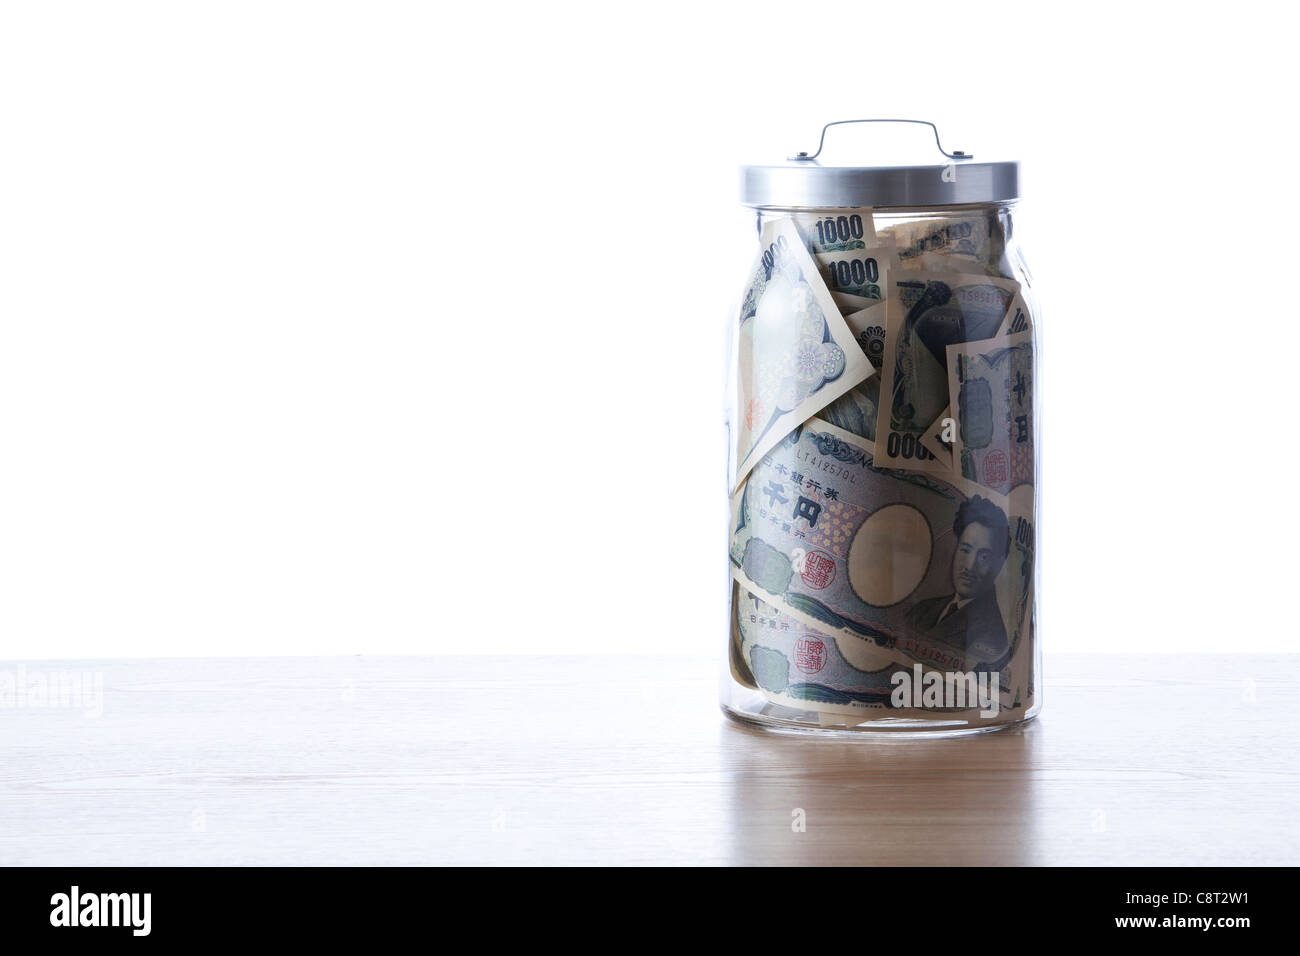 One Thousand Yen Notes inside of glass jar against white background Stock Photo